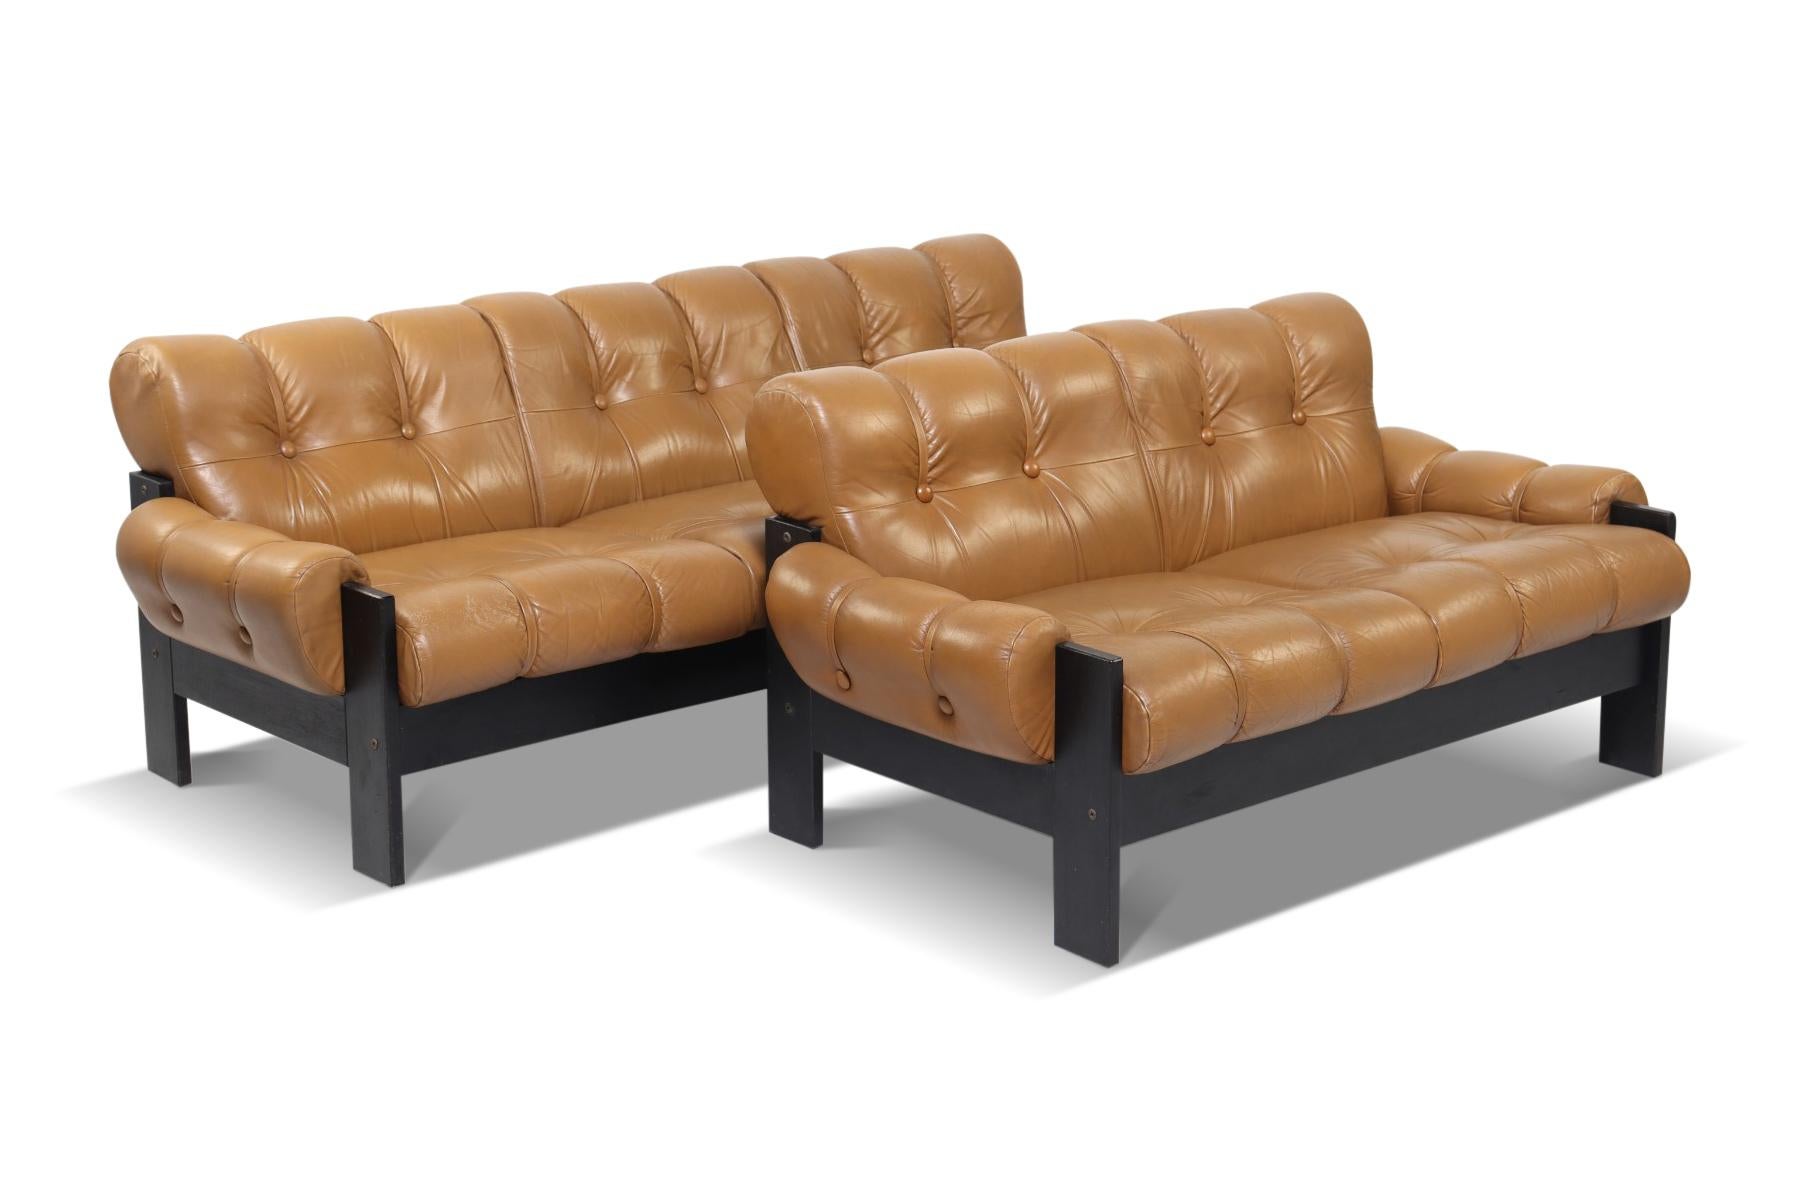 Pair of Leather + Black Lacquered Sofas by Uu-Vee Kaluste Oy In Good Condition For Sale In Berkeley, CA